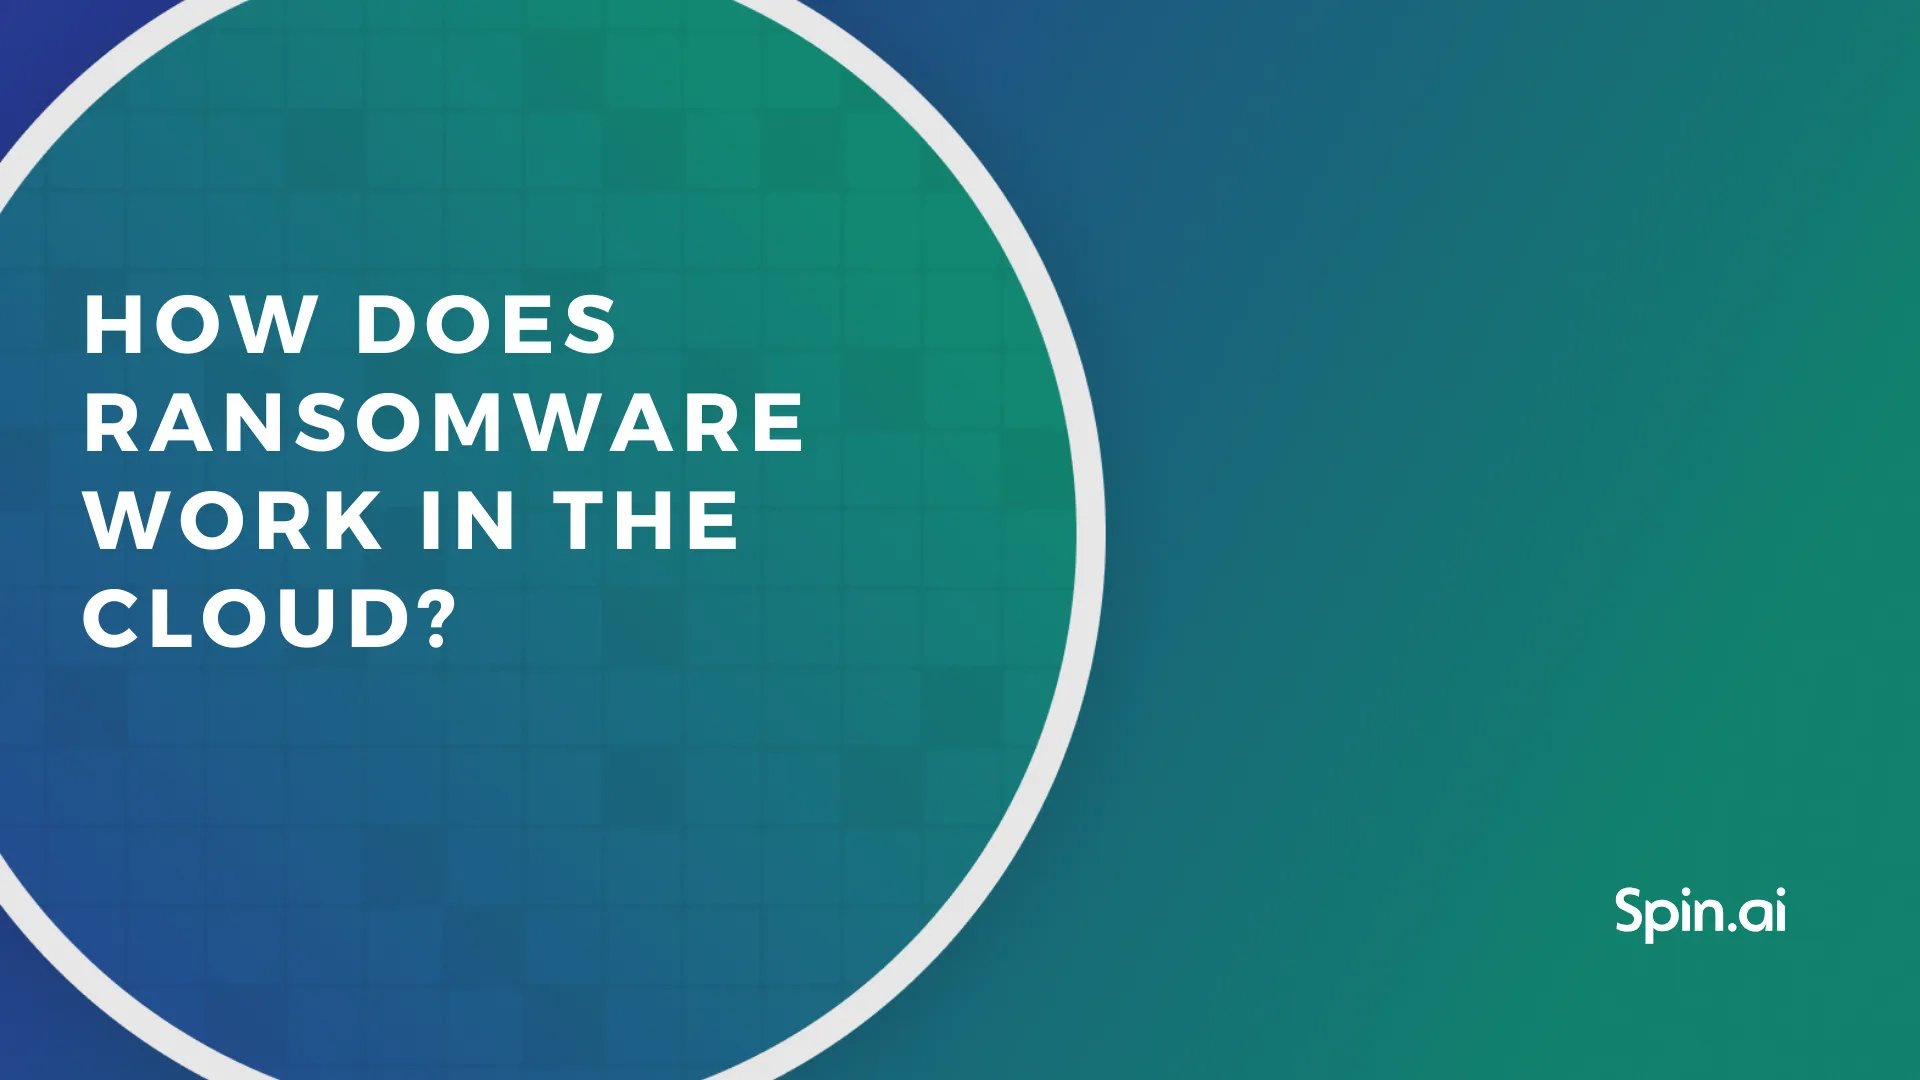 How Does Ransomware Work in the Cloud?